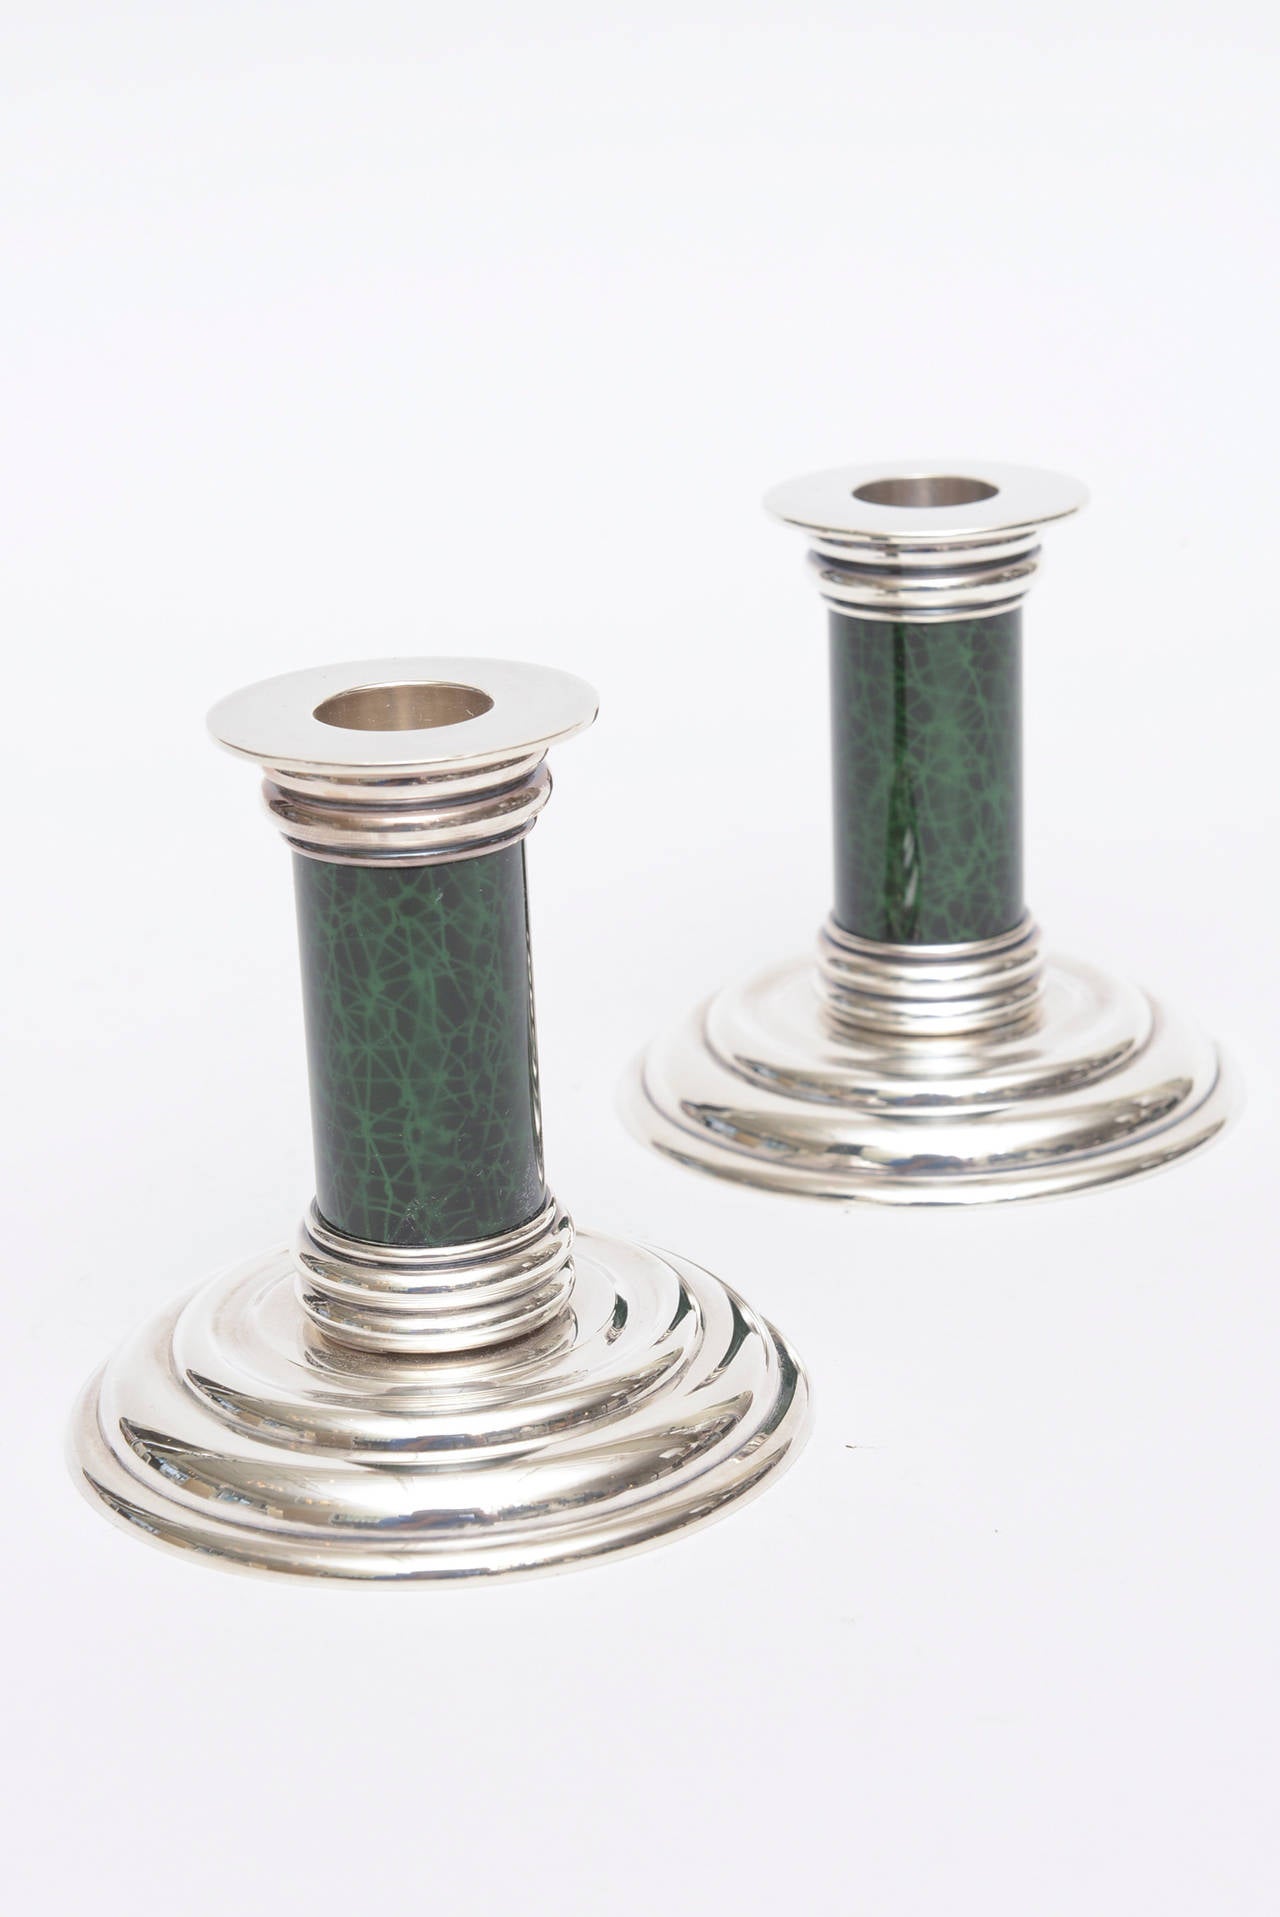 These lovely hallmarked Jean Puiforcat Art Deco pair of small candlesticks have stepped bottom and top. They are silver plate and malachite enamel in the center.
They have the Puiforcat maker on the bottom; all hallmarked.
These are small, lovely